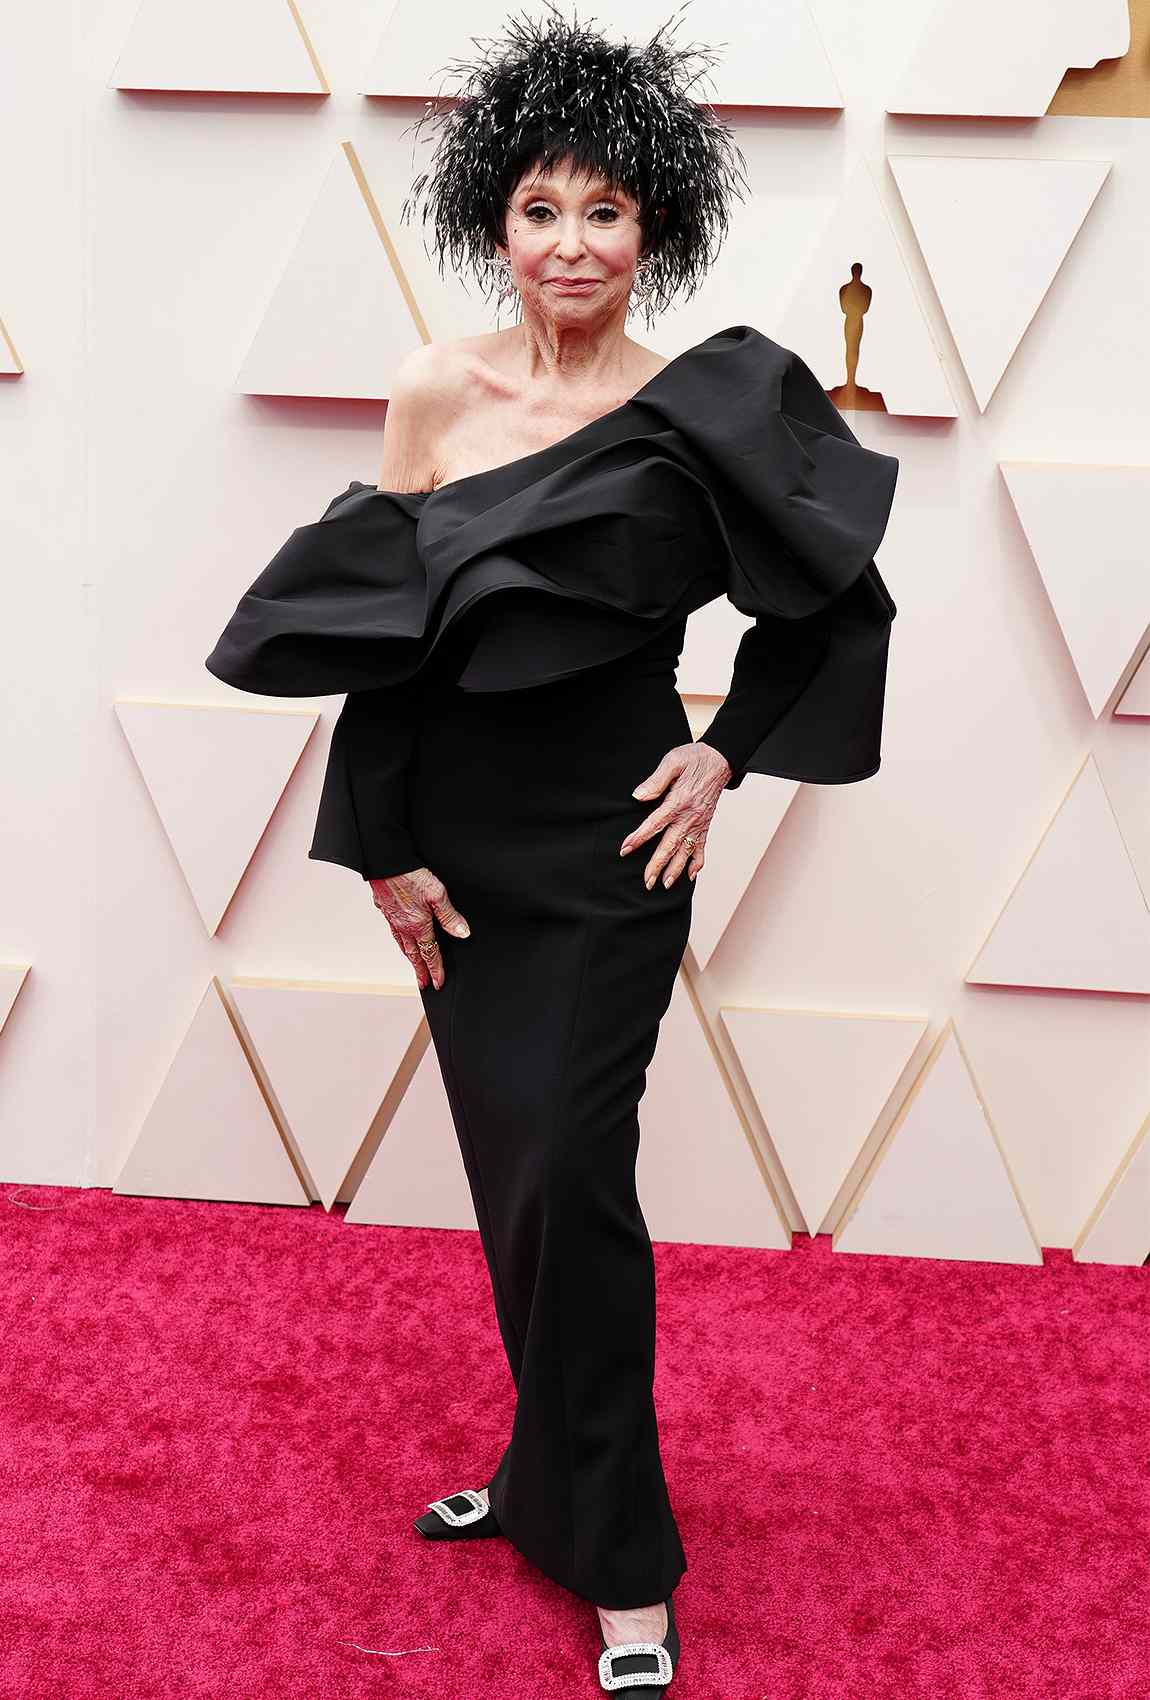 Rita Moreno 'Can't Get Over' Herself in 2022 Oscars Gown and Feathered  Headpiece | PEOPLE.com